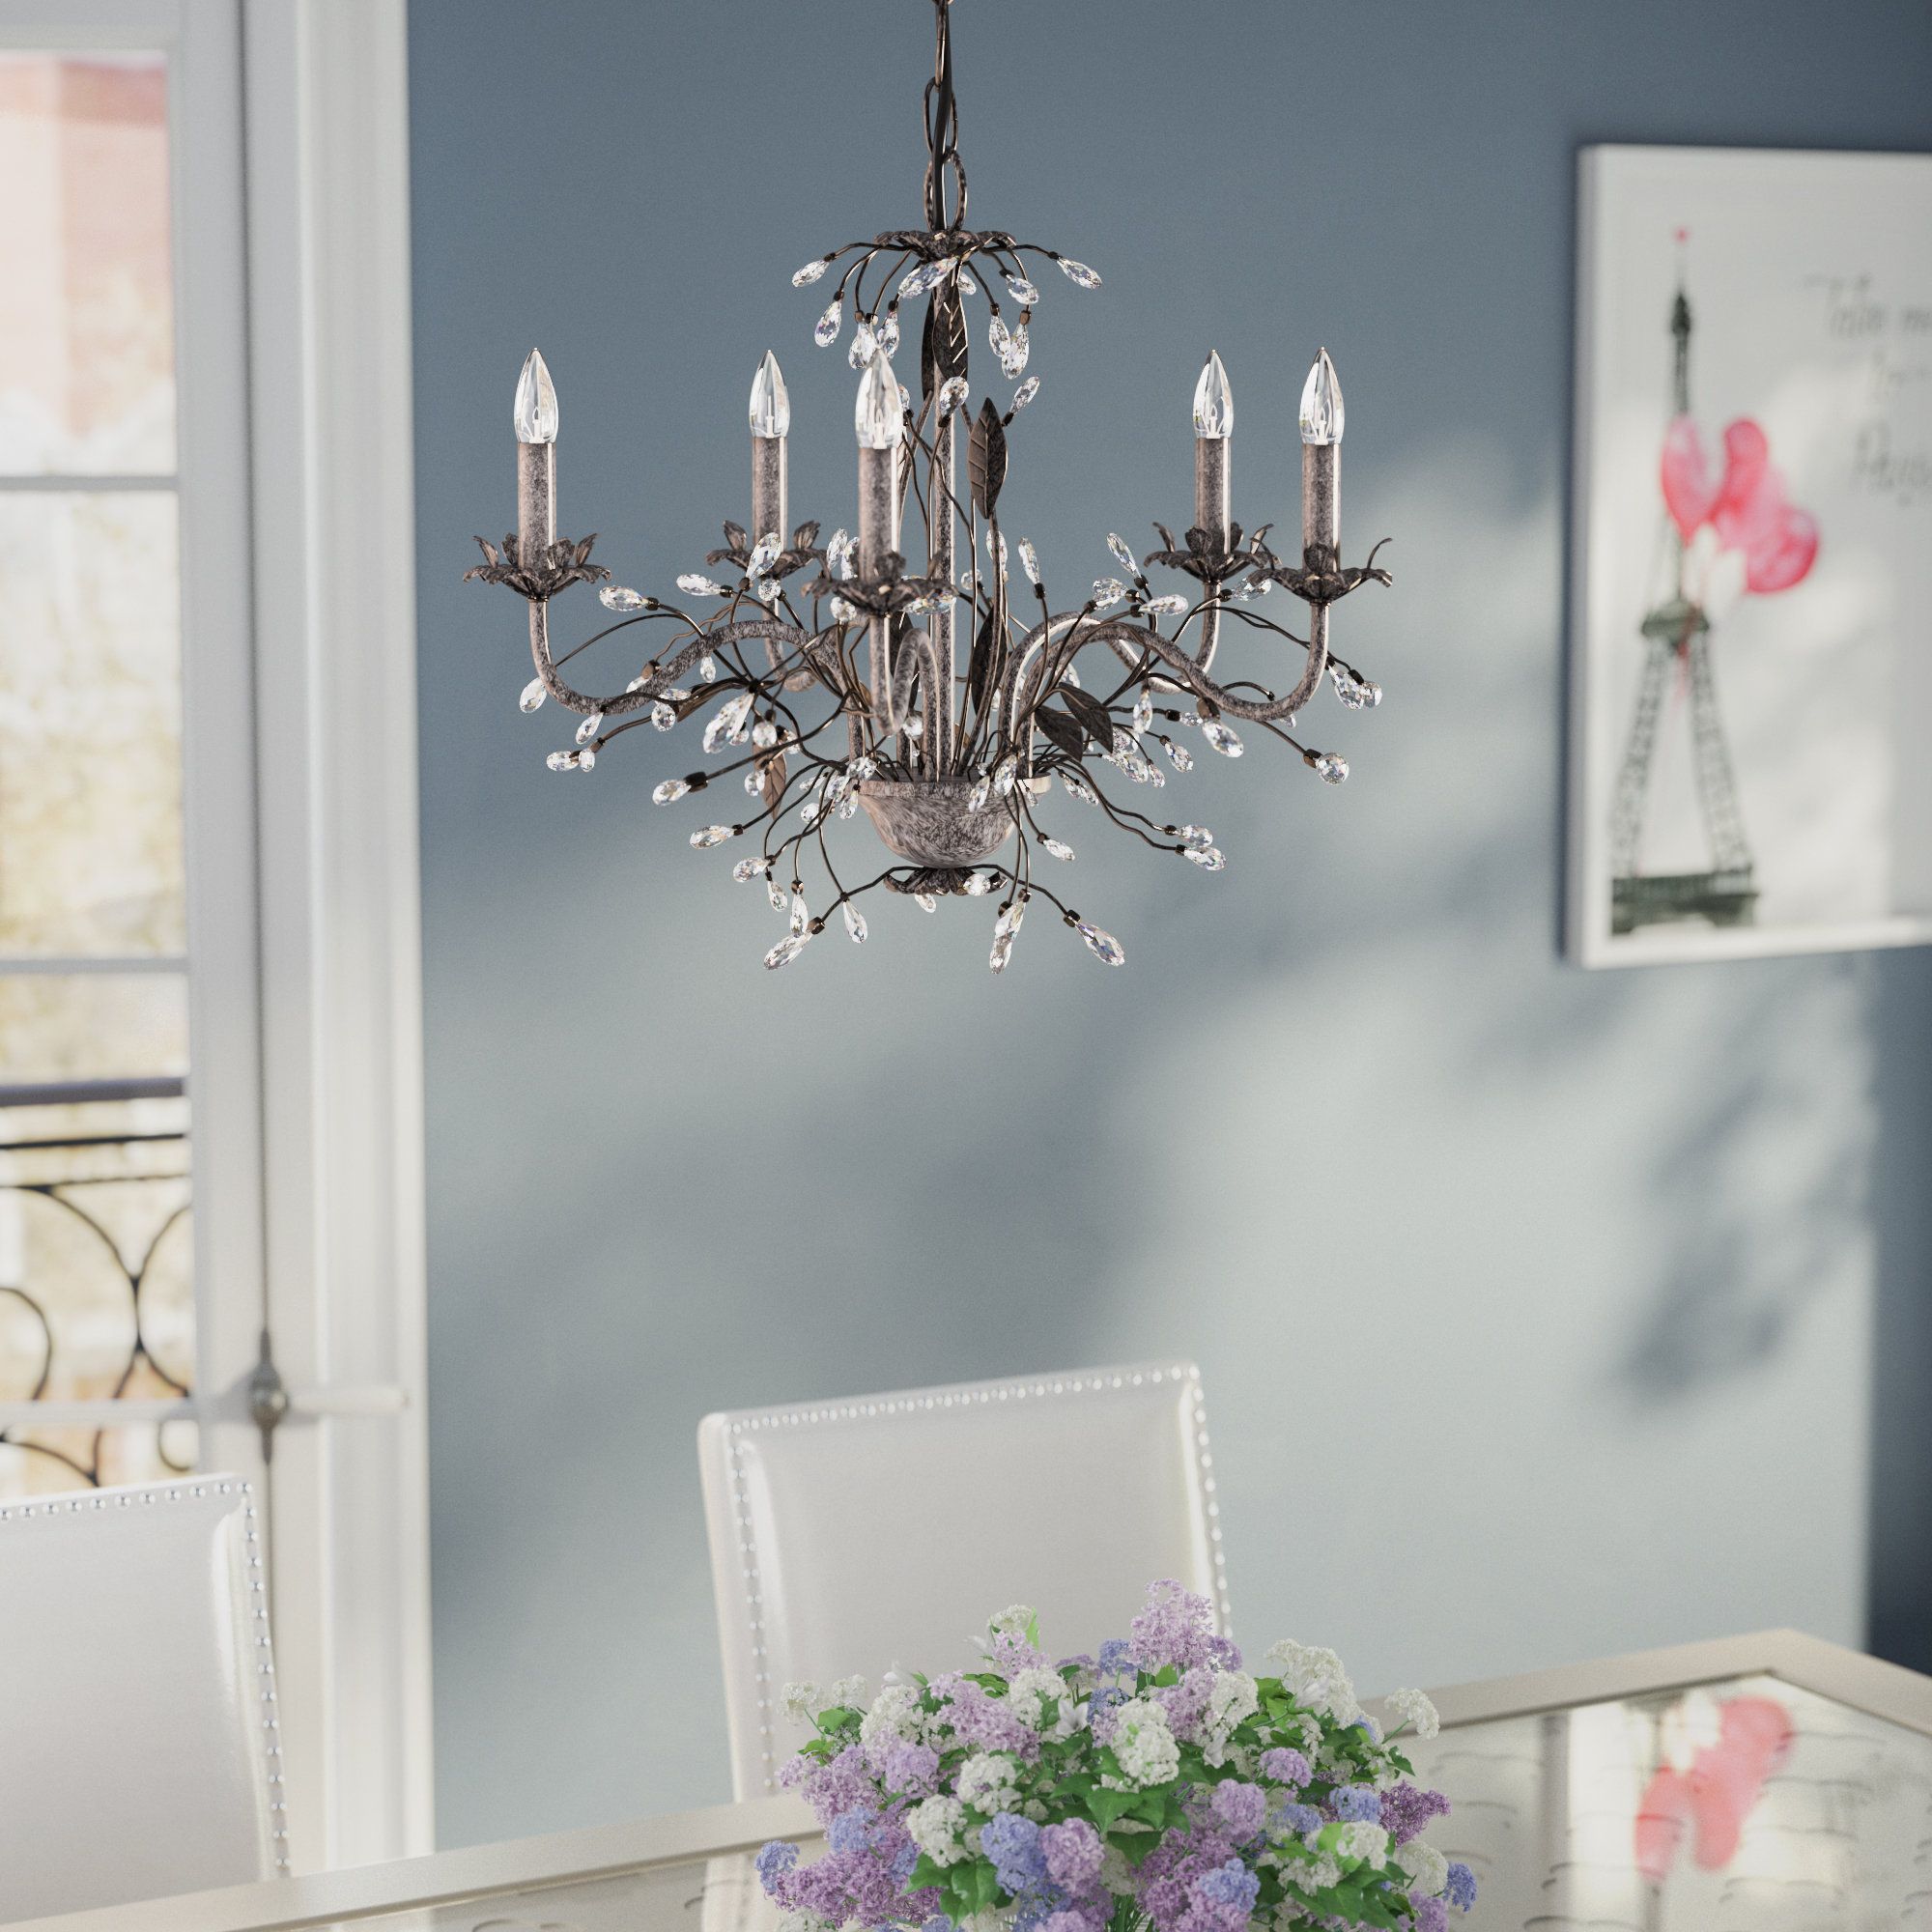 Hesse 5 Light Candle Style Chandelier Intended For Blanchette 5 Light Candle Style Chandeliers (View 12 of 30)